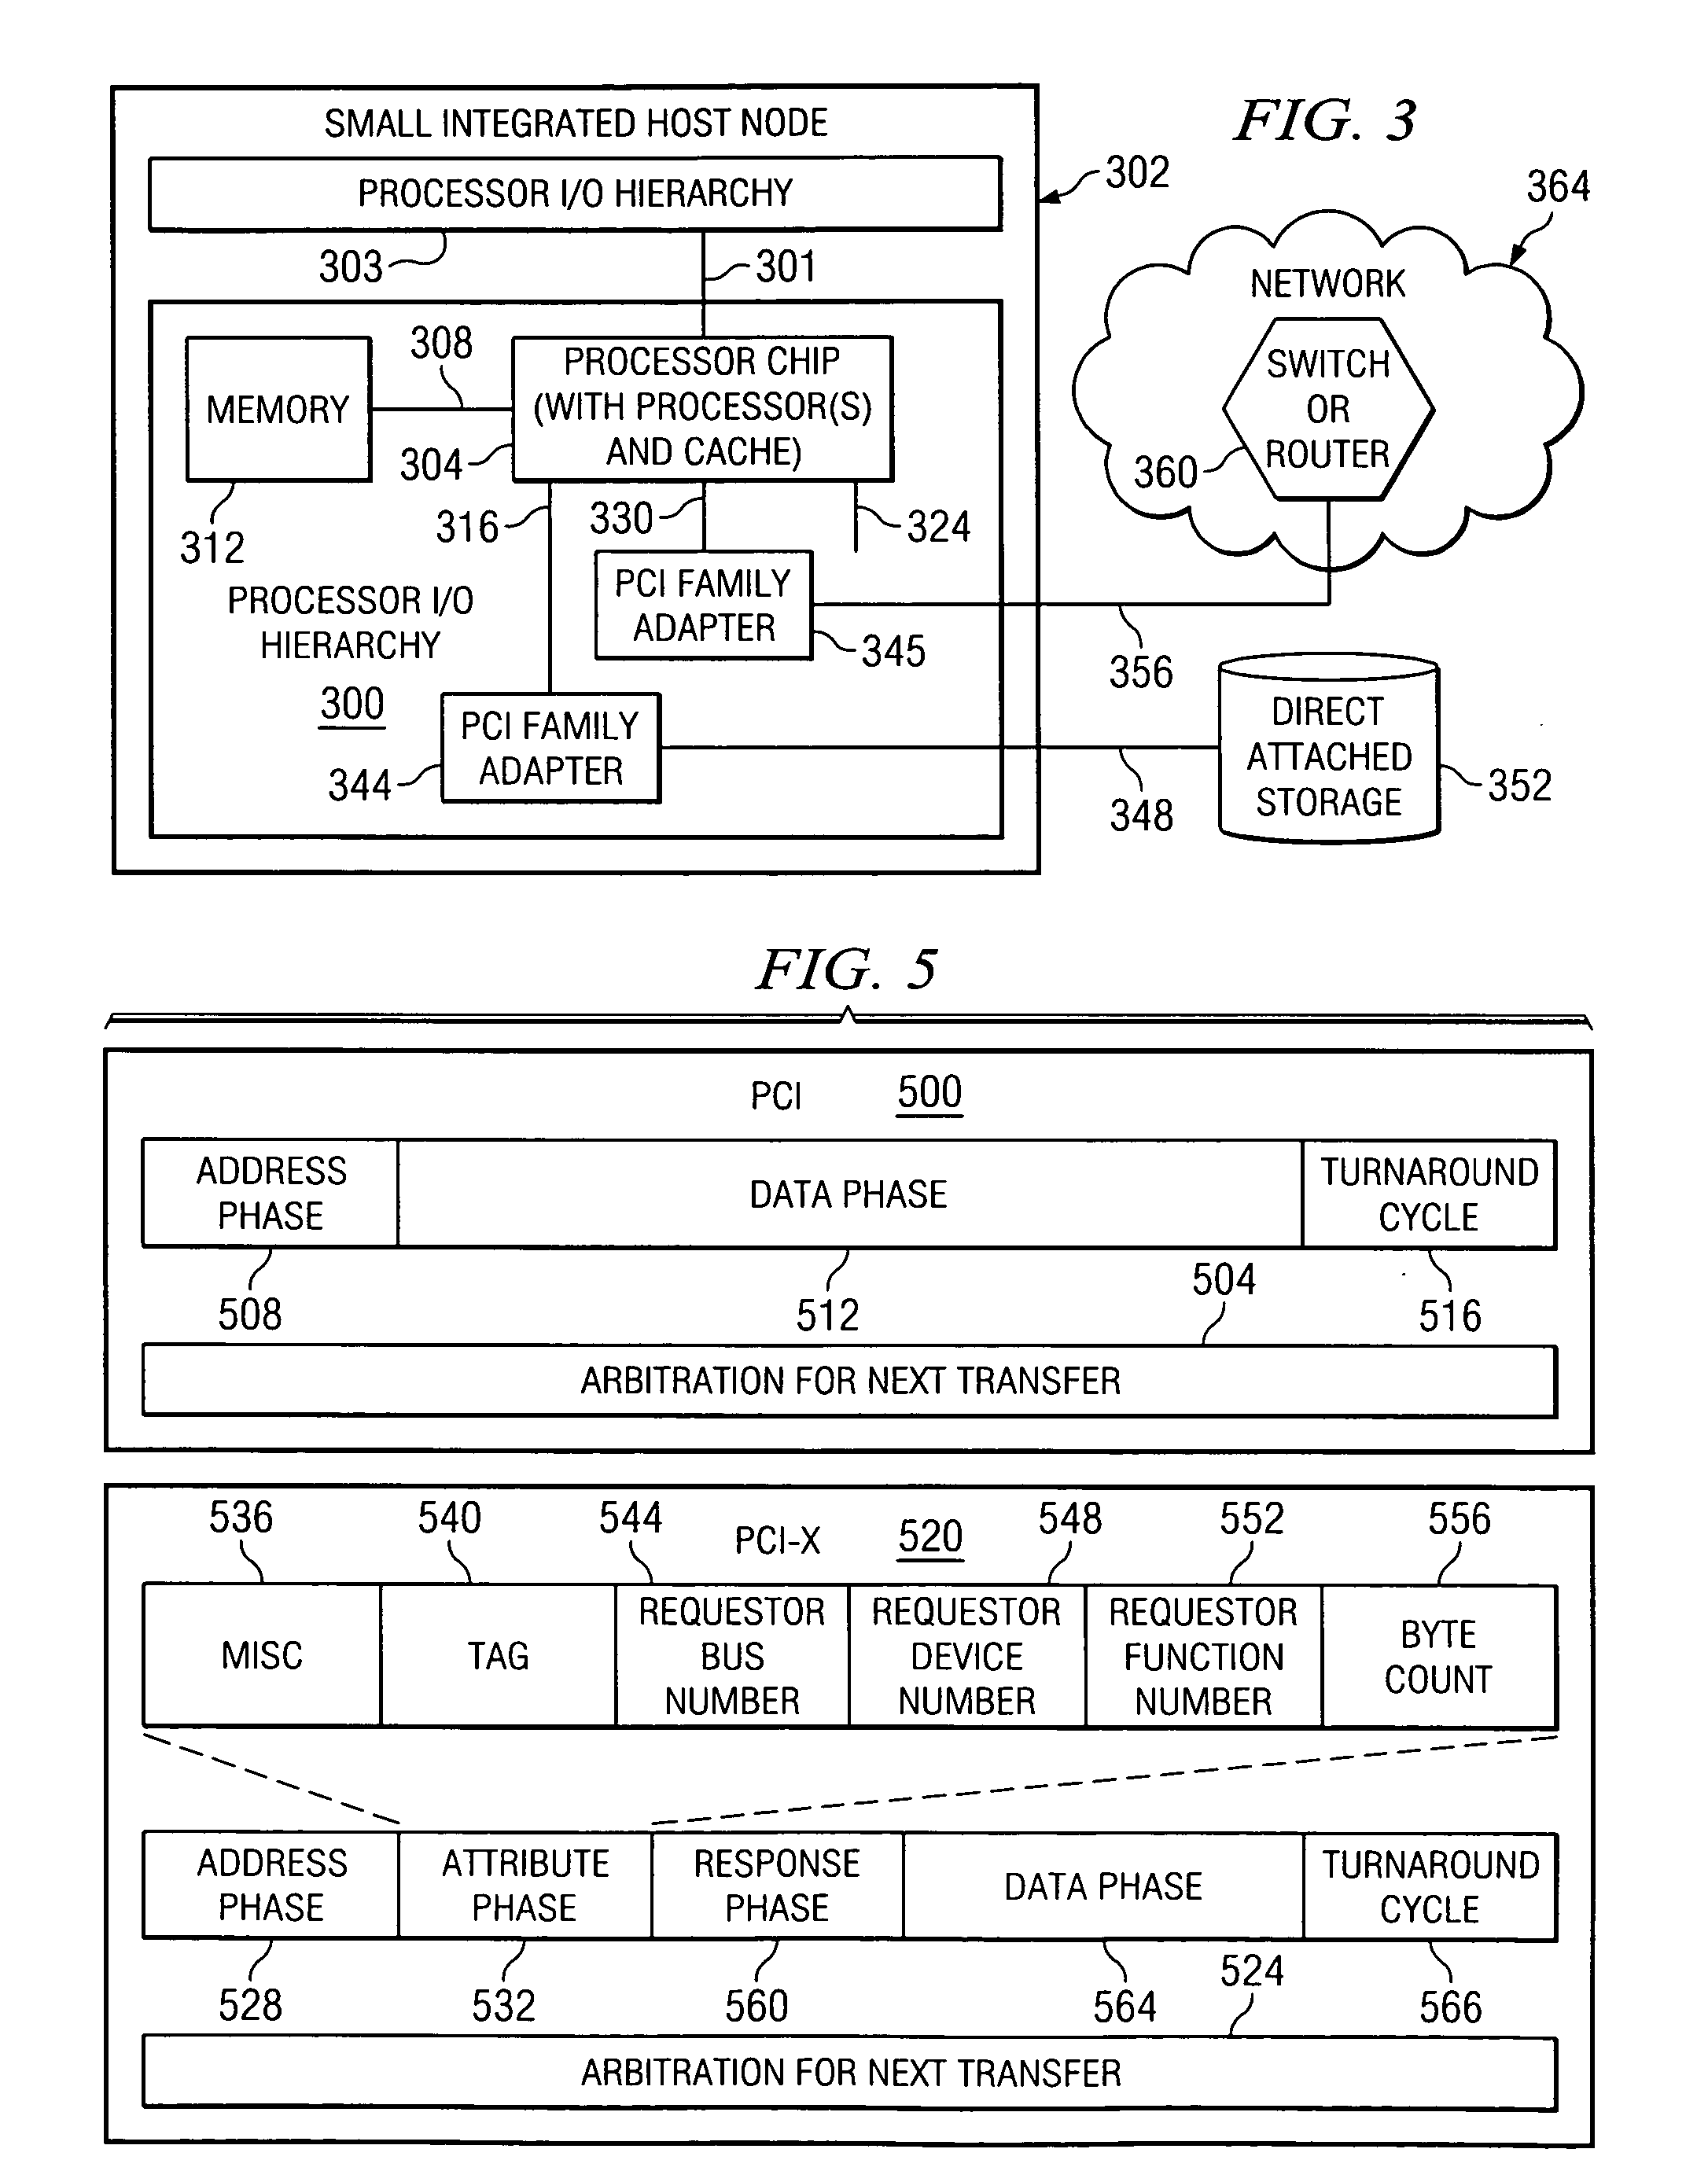 Method and system for native virtualization on a partially trusted adapter using adapter bus, device and function number for identification